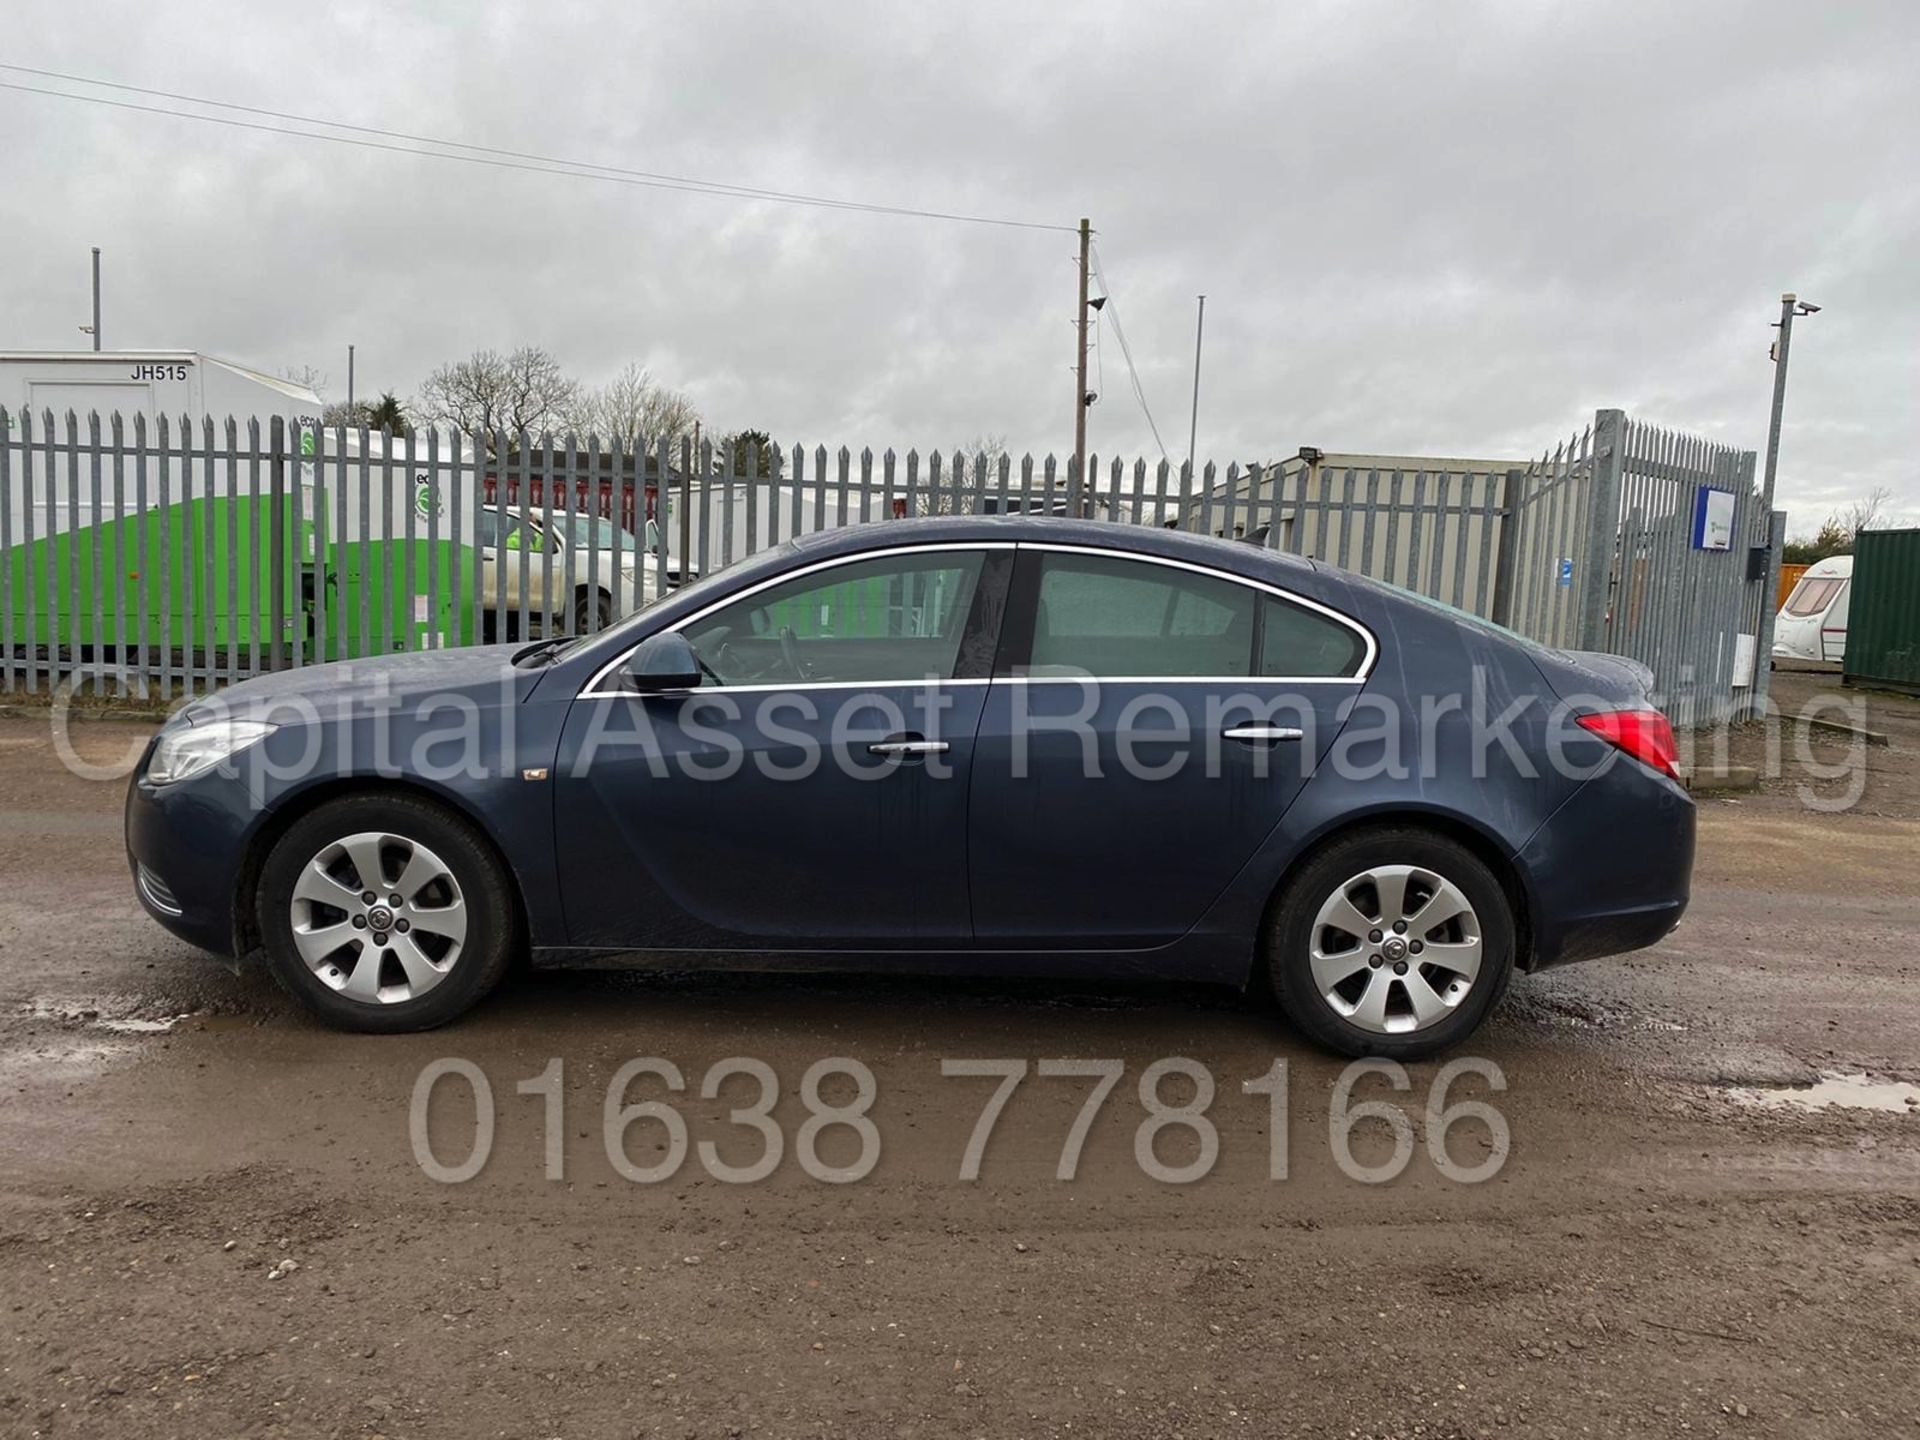 ON SALE VAUXHALL INSIGNIA *SE EDITION* (2009) '1.8 PETROL -6 SPEED' *A/C* LOW MILES ! (NO VAT) - Image 4 of 15